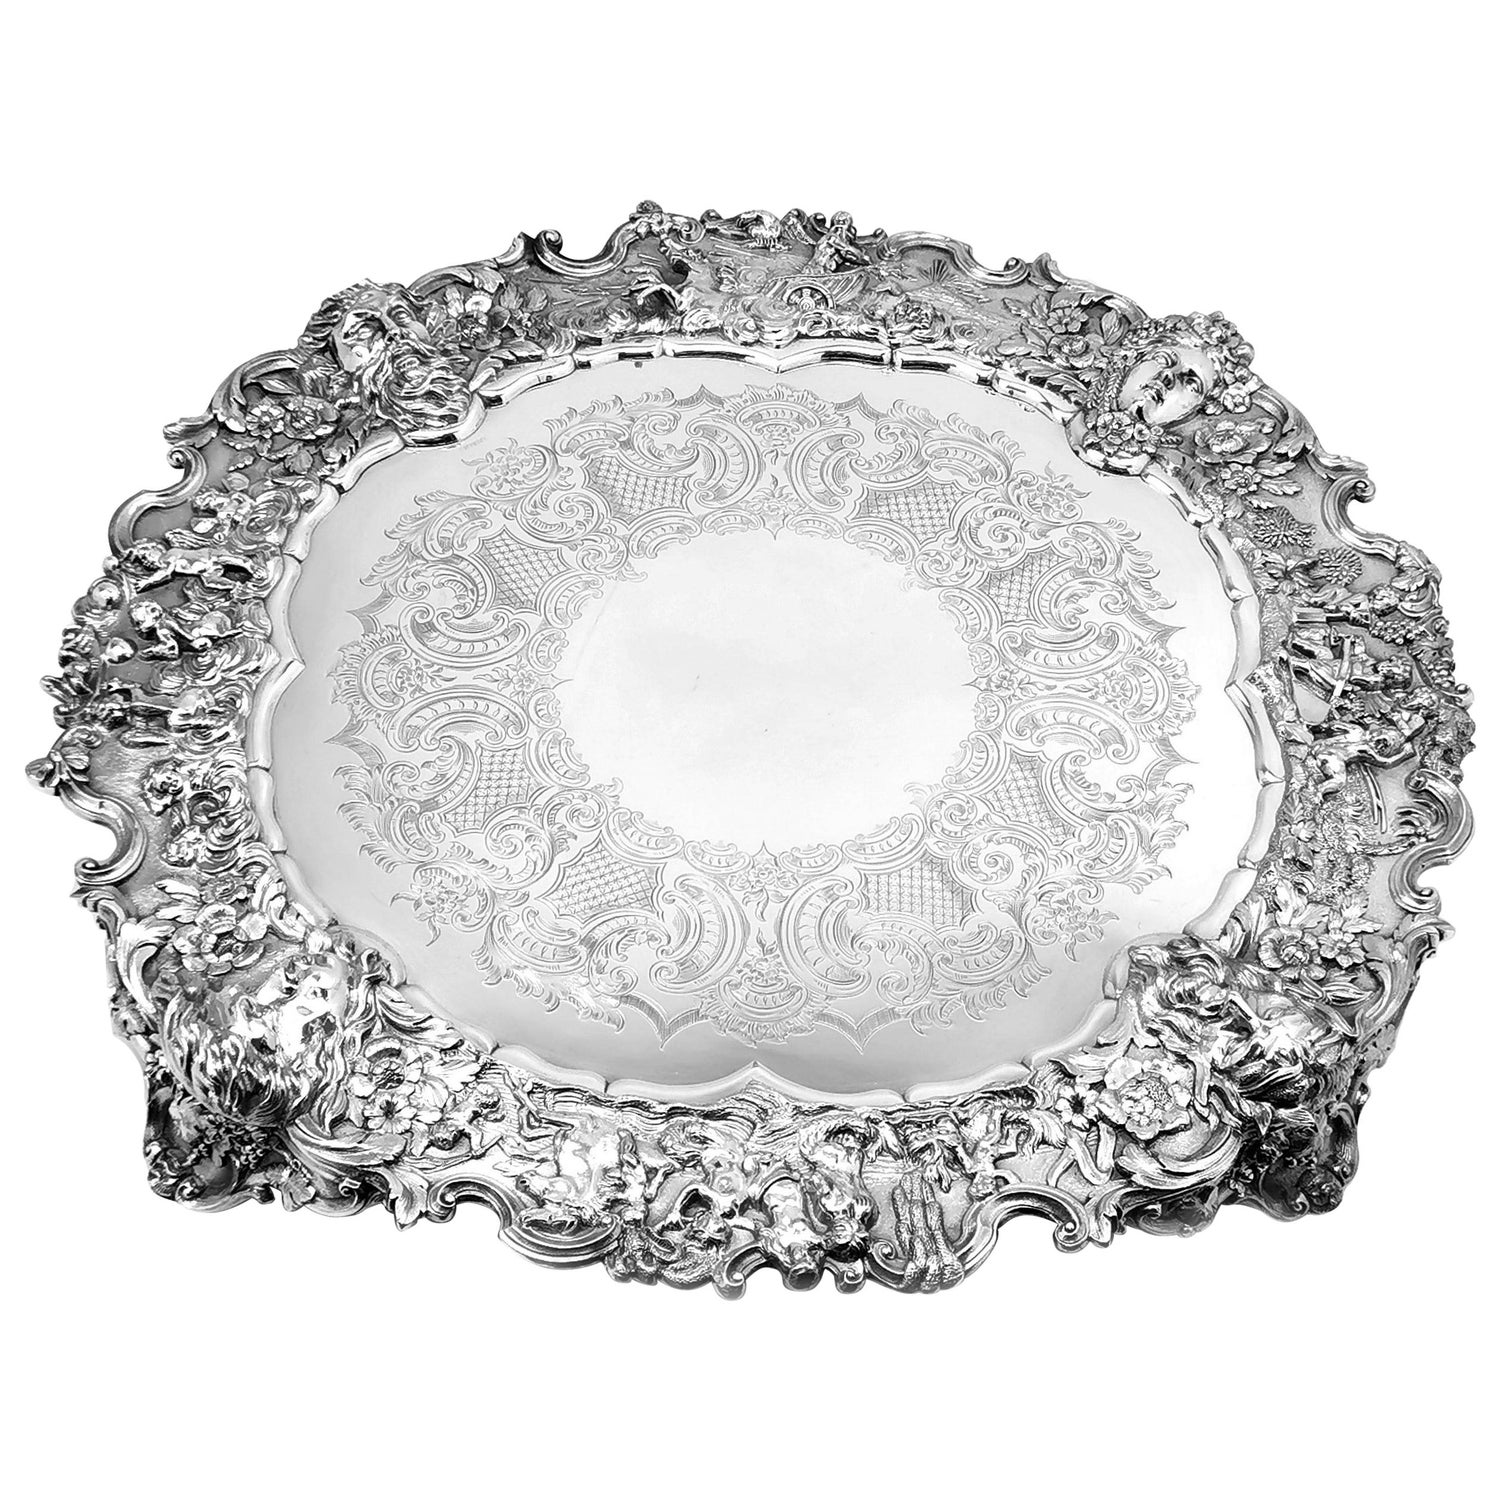 Victorian Extra Large Ornate Silver Plated Salver Tray Platter circa 1880